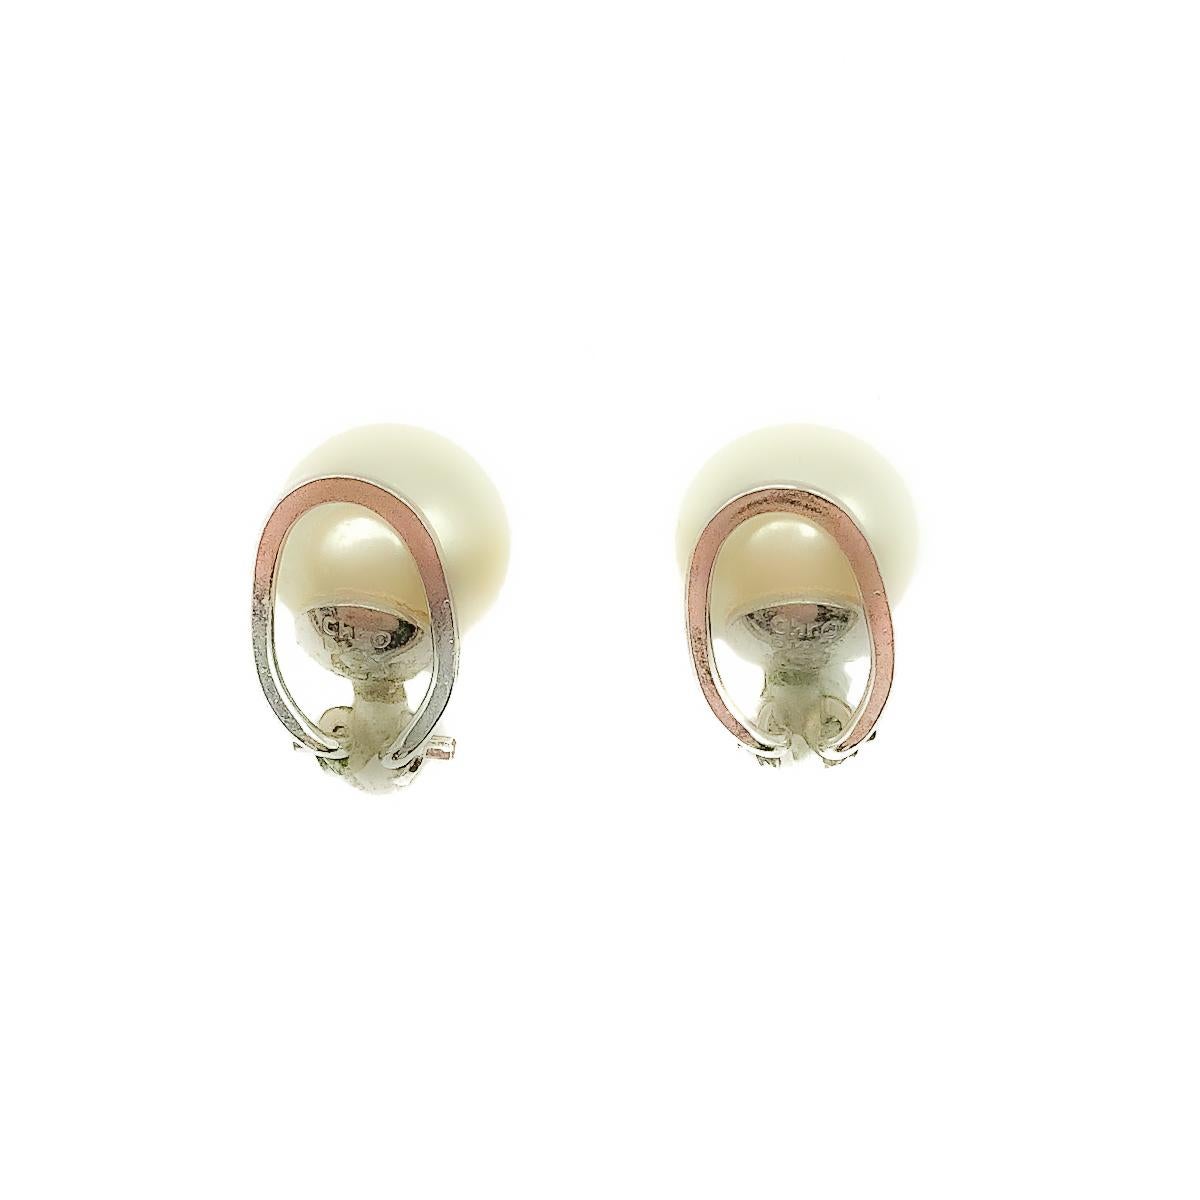 A delightfully feminine pair of Vintage Dior Petite Pearl Earrings. Crafted in rhodium plated metal with a full glass faux pearl sitting in a cup shaped mount with a french style hoop clip mechanism. Signed, in very good vintage condition, approx.